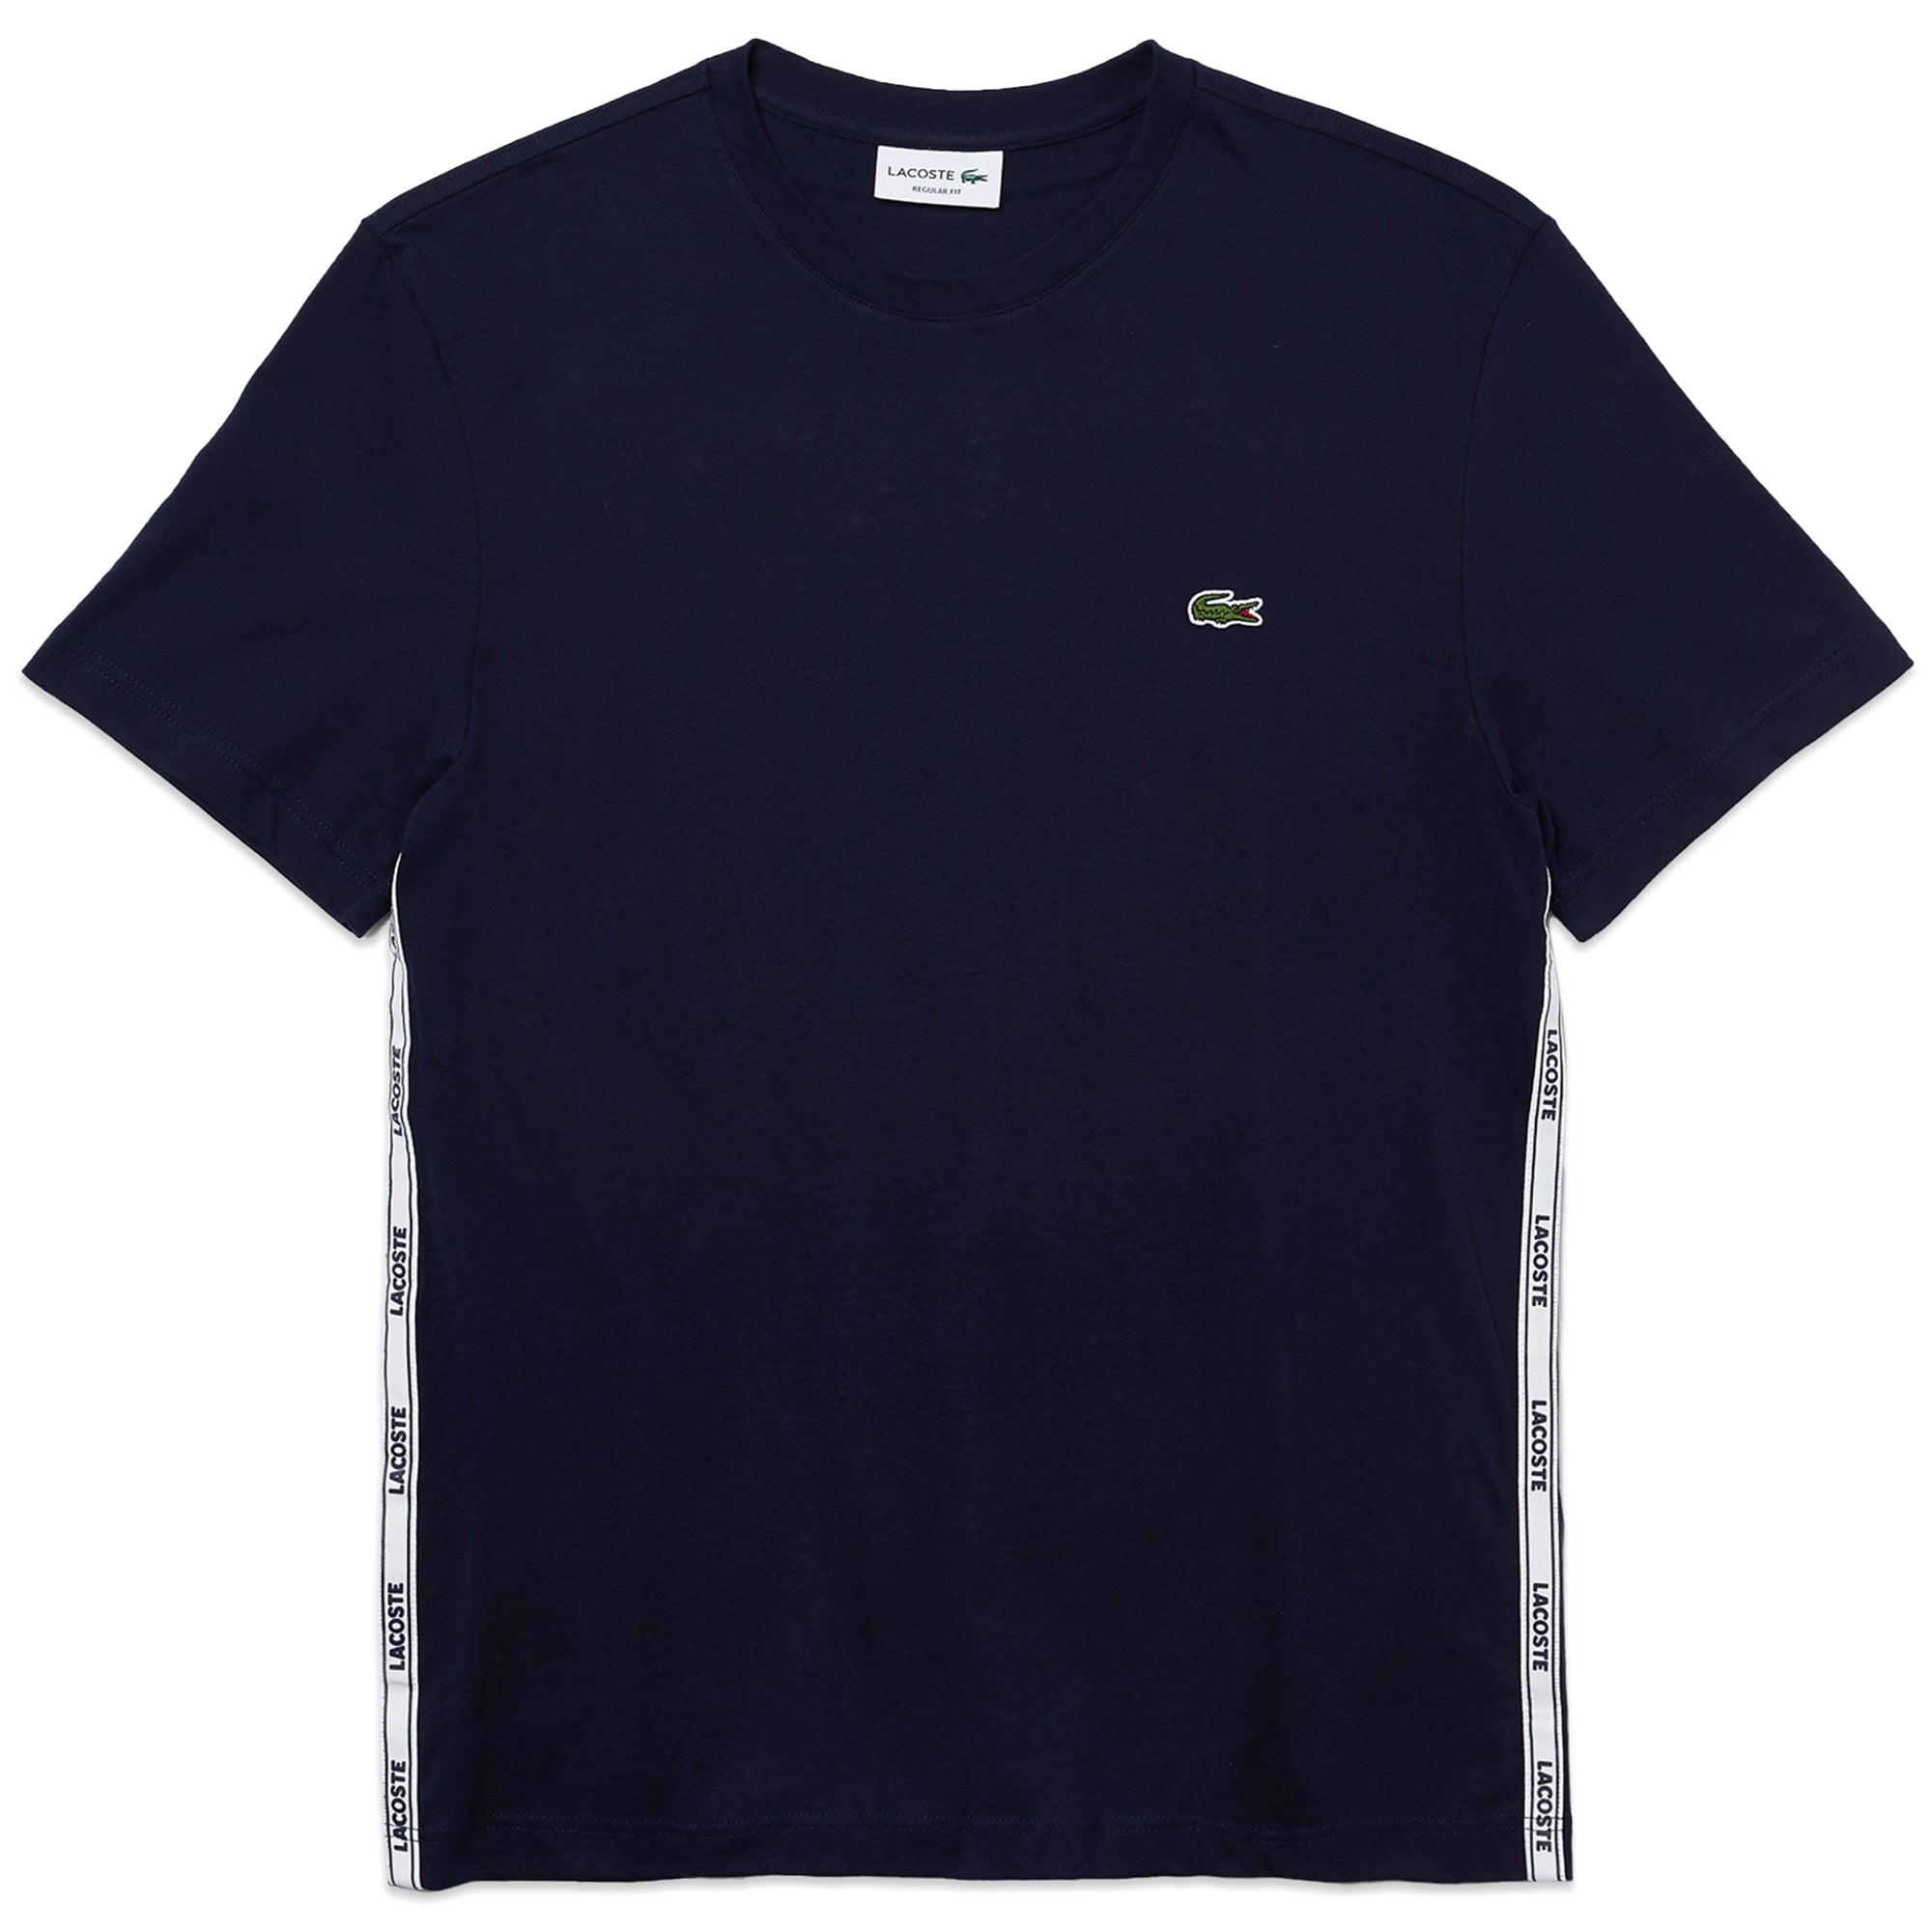 Lacoste Side Tape T-Shirt TH1207 - Navy